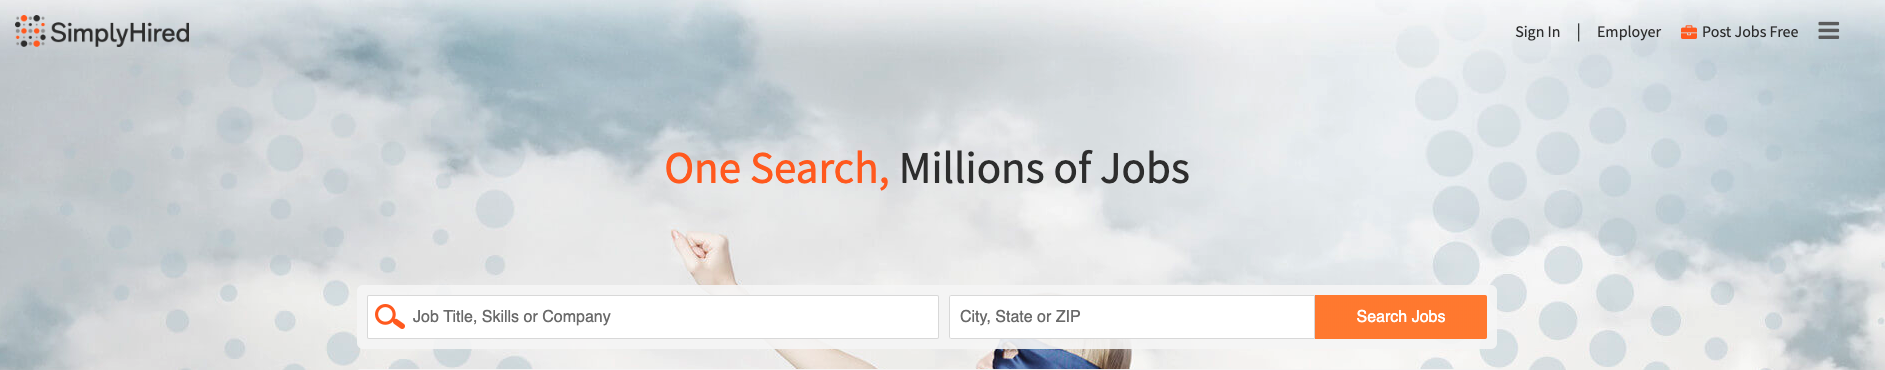 simplyhired job search